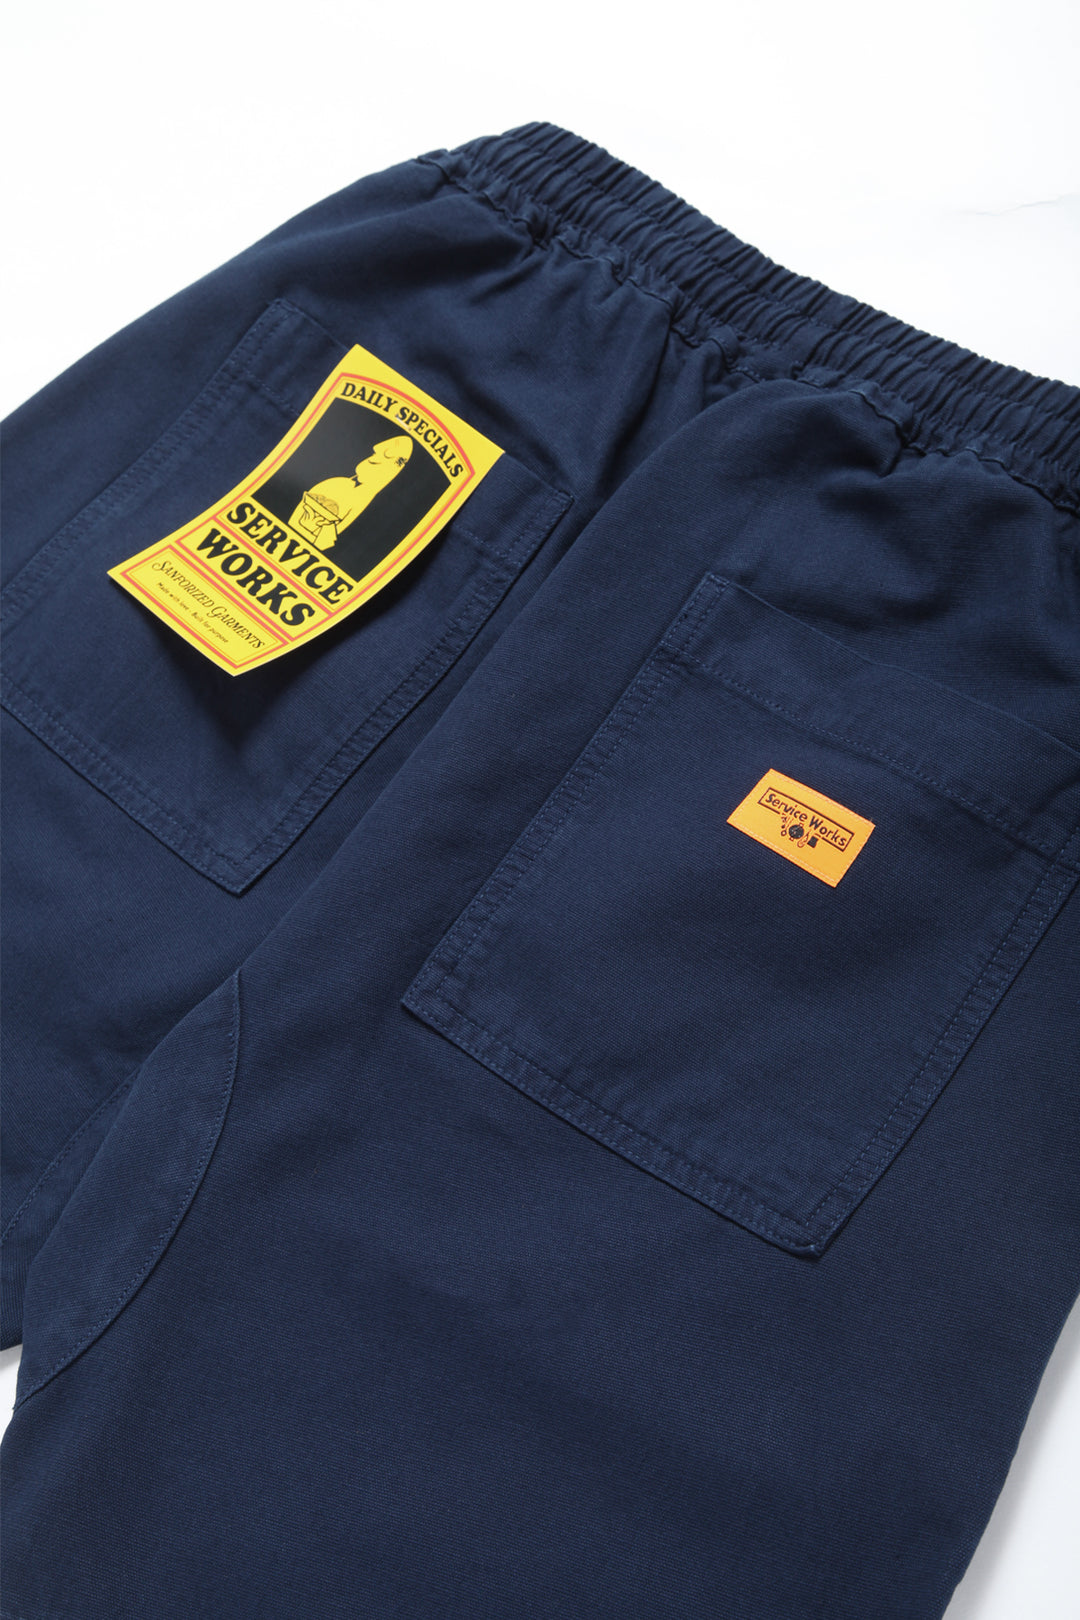 Service Works - Classic Chef Shorts - Navy